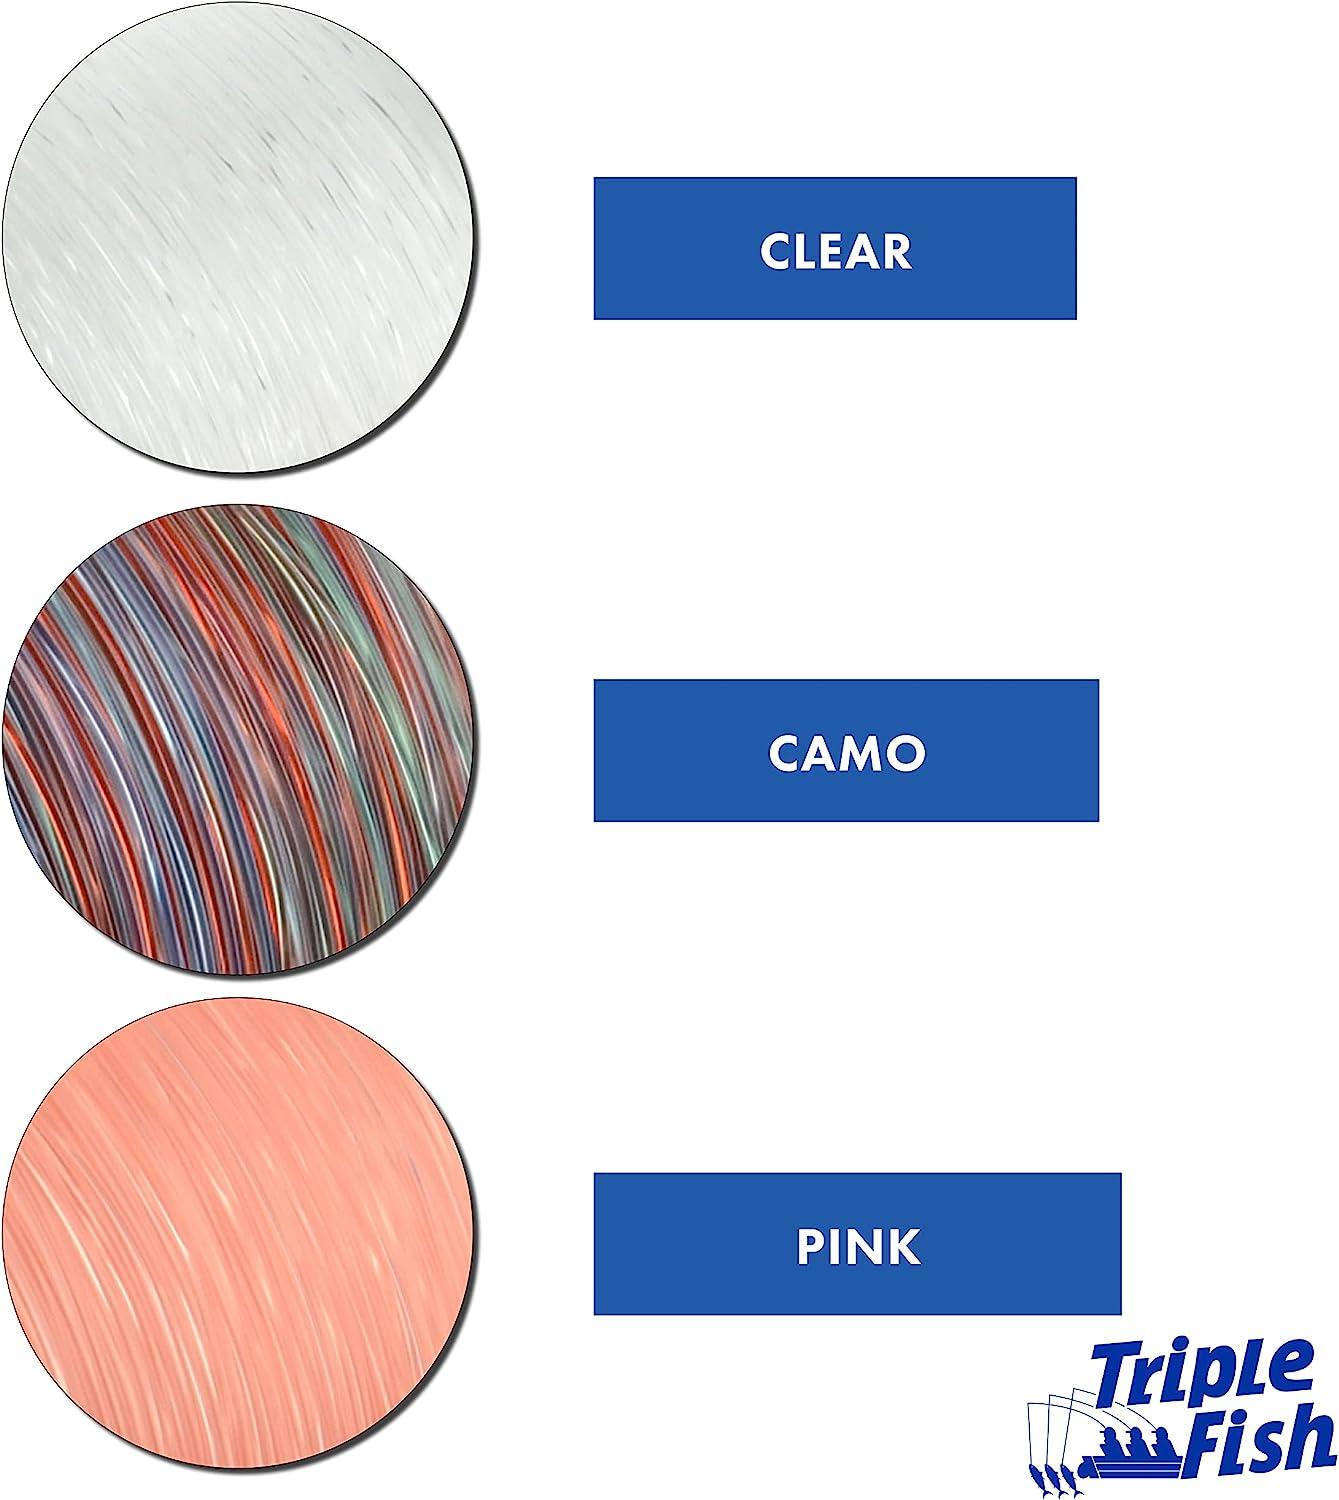 Triple Fish Monofilament Fishing Line - Strong Clear Pink Camo